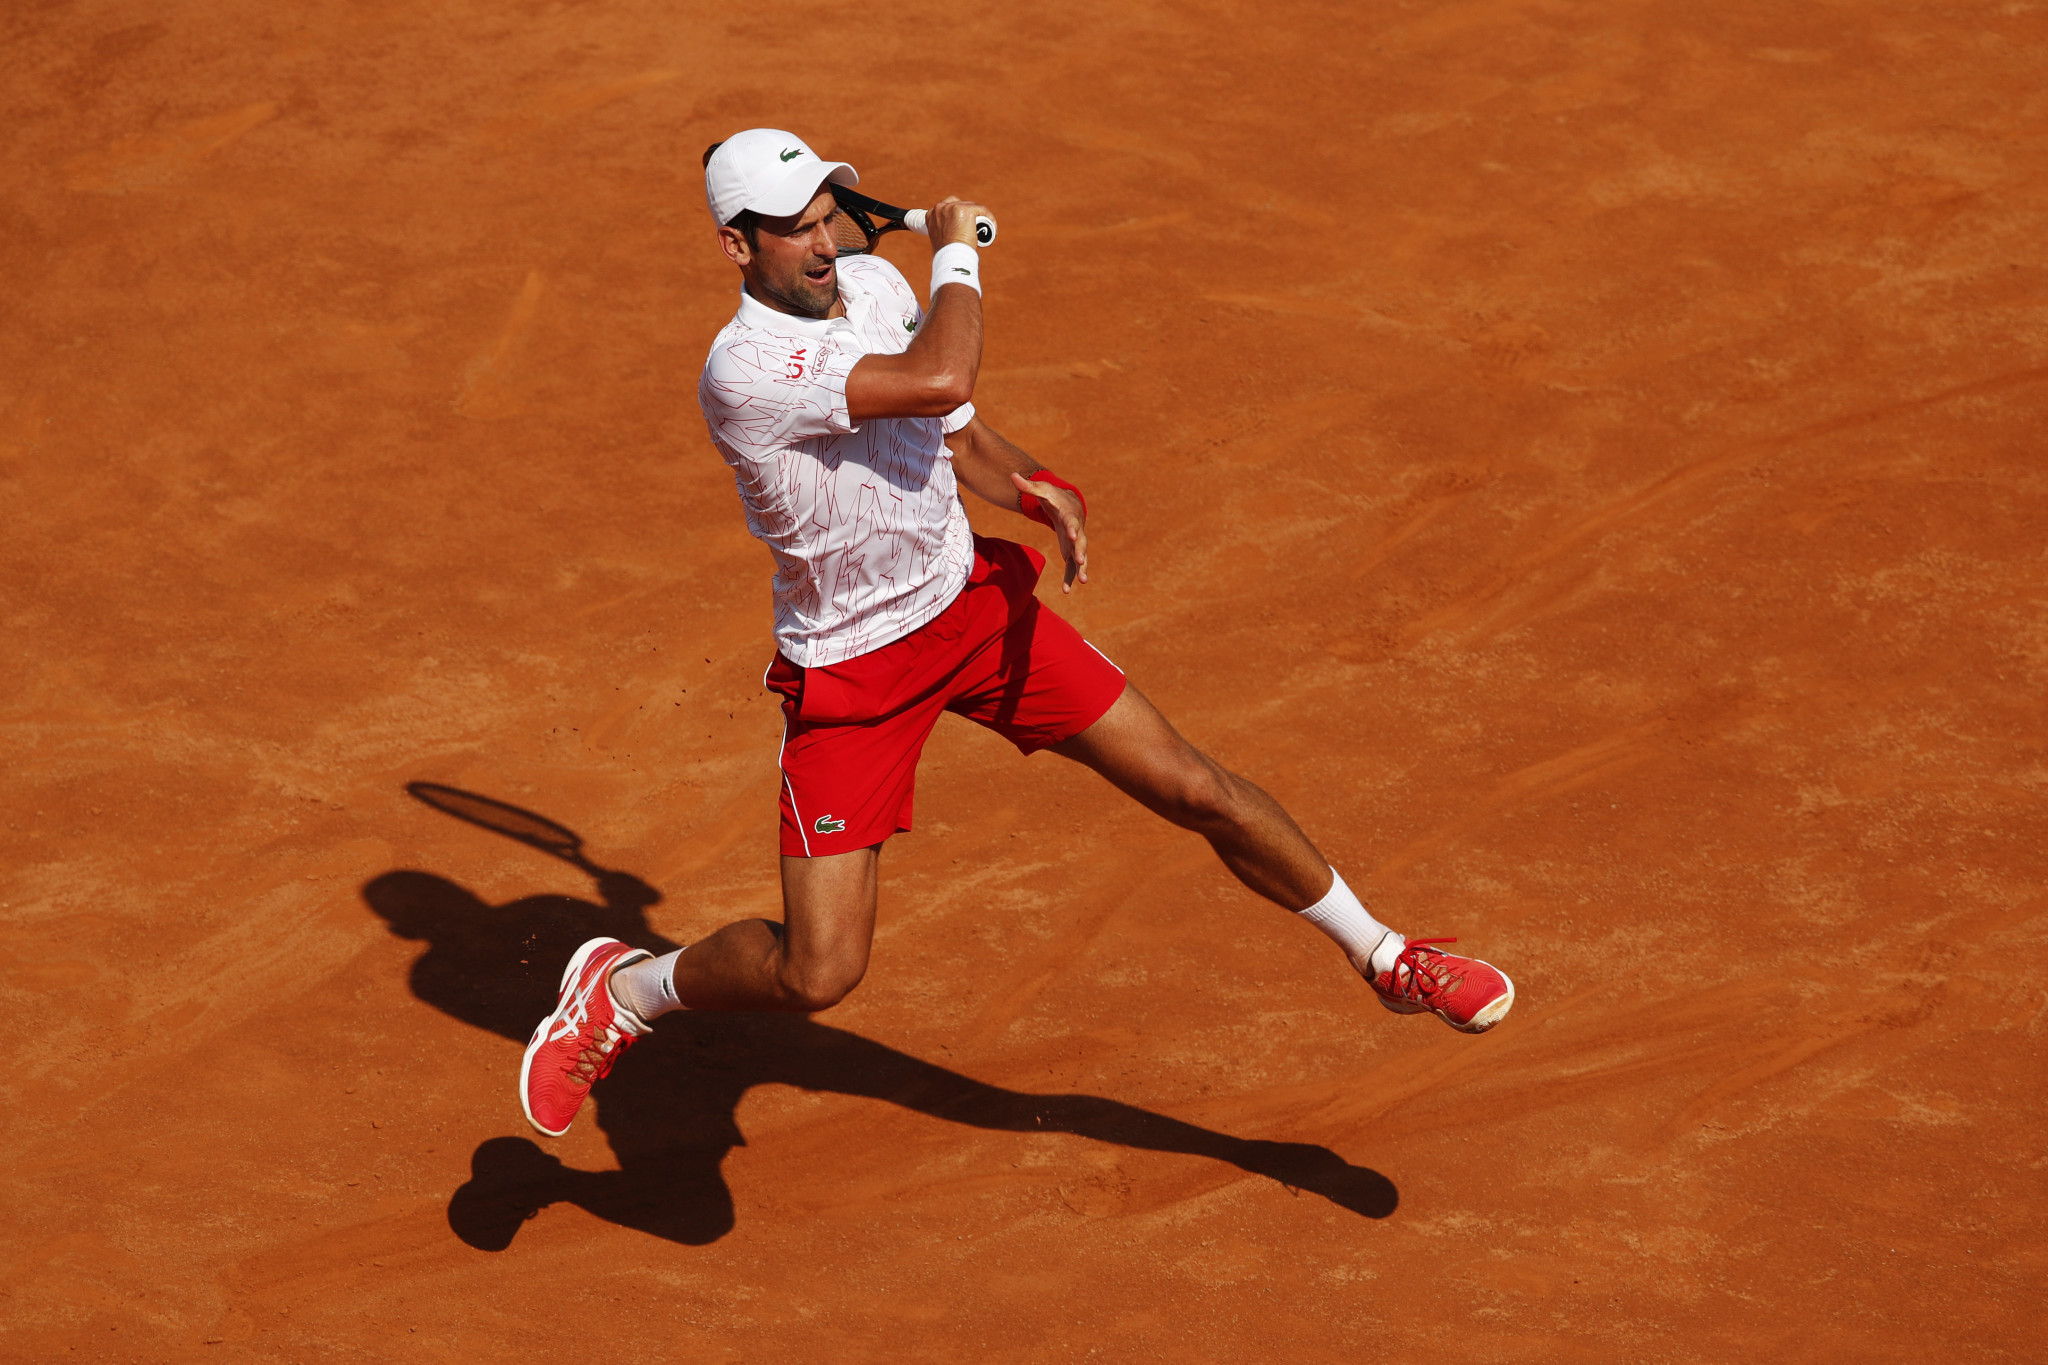 Djokovic wins first match since US Open disqualification as top seeds victorious in Rome